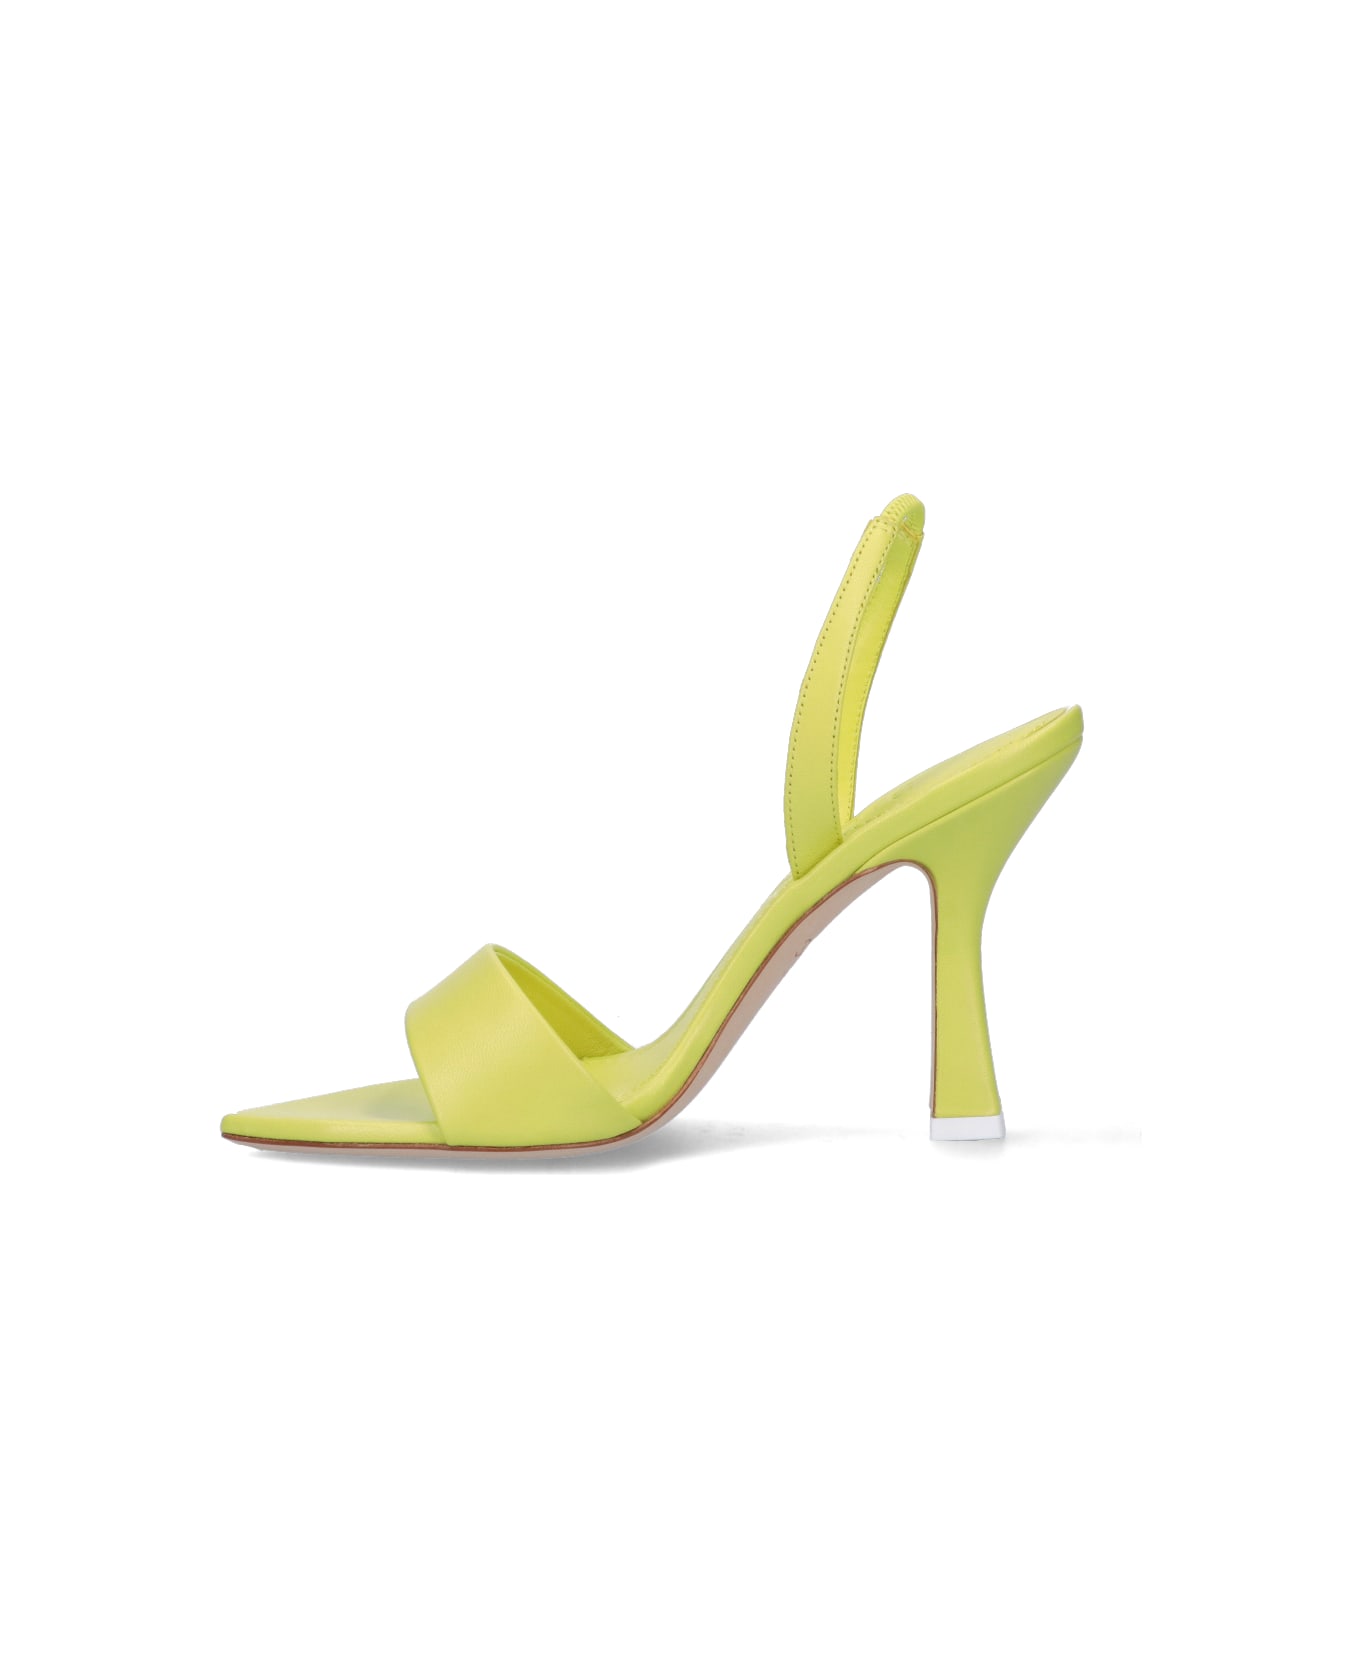 3JUIN 'lily' Sandals - Green